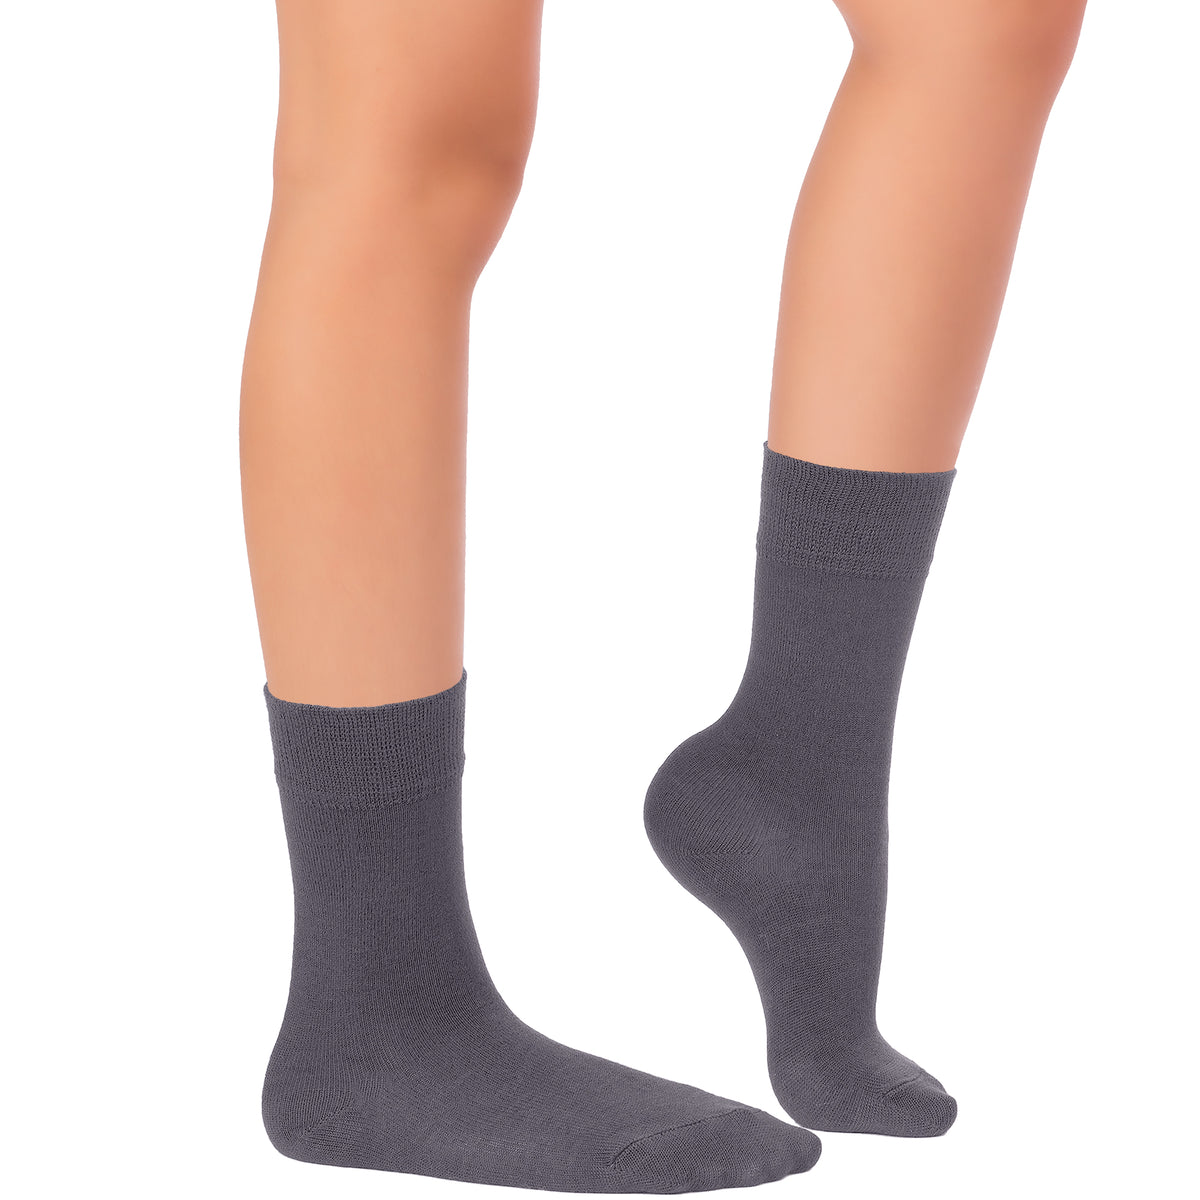 This image depicts a woman's legs adorned in grey socks, wearing Kids' Dress Crew Bamboo.